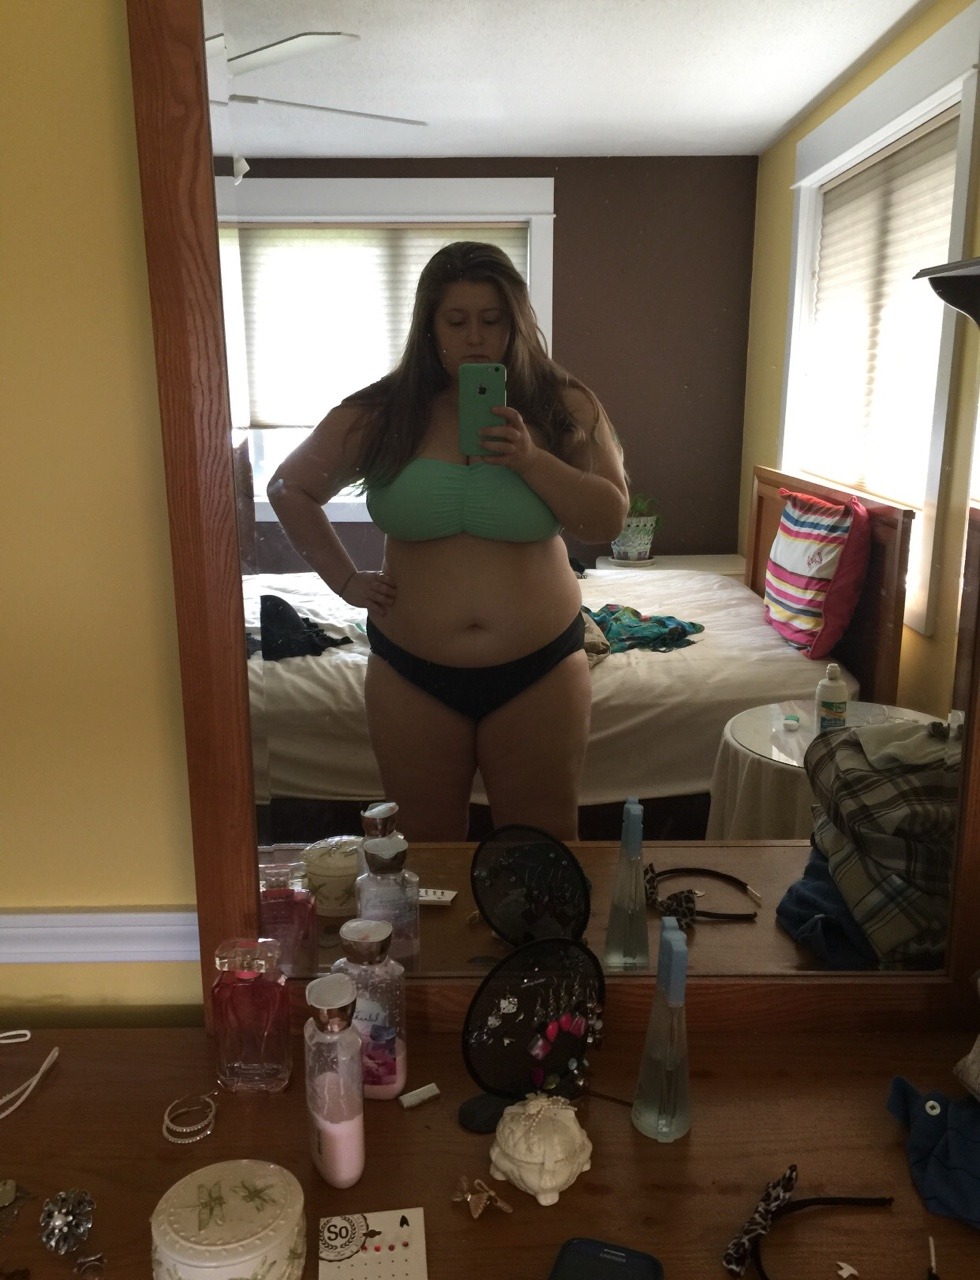 chubby-bunnies:  I’m Kateryna, 25, and I’m a size 18. This is my first time submitting